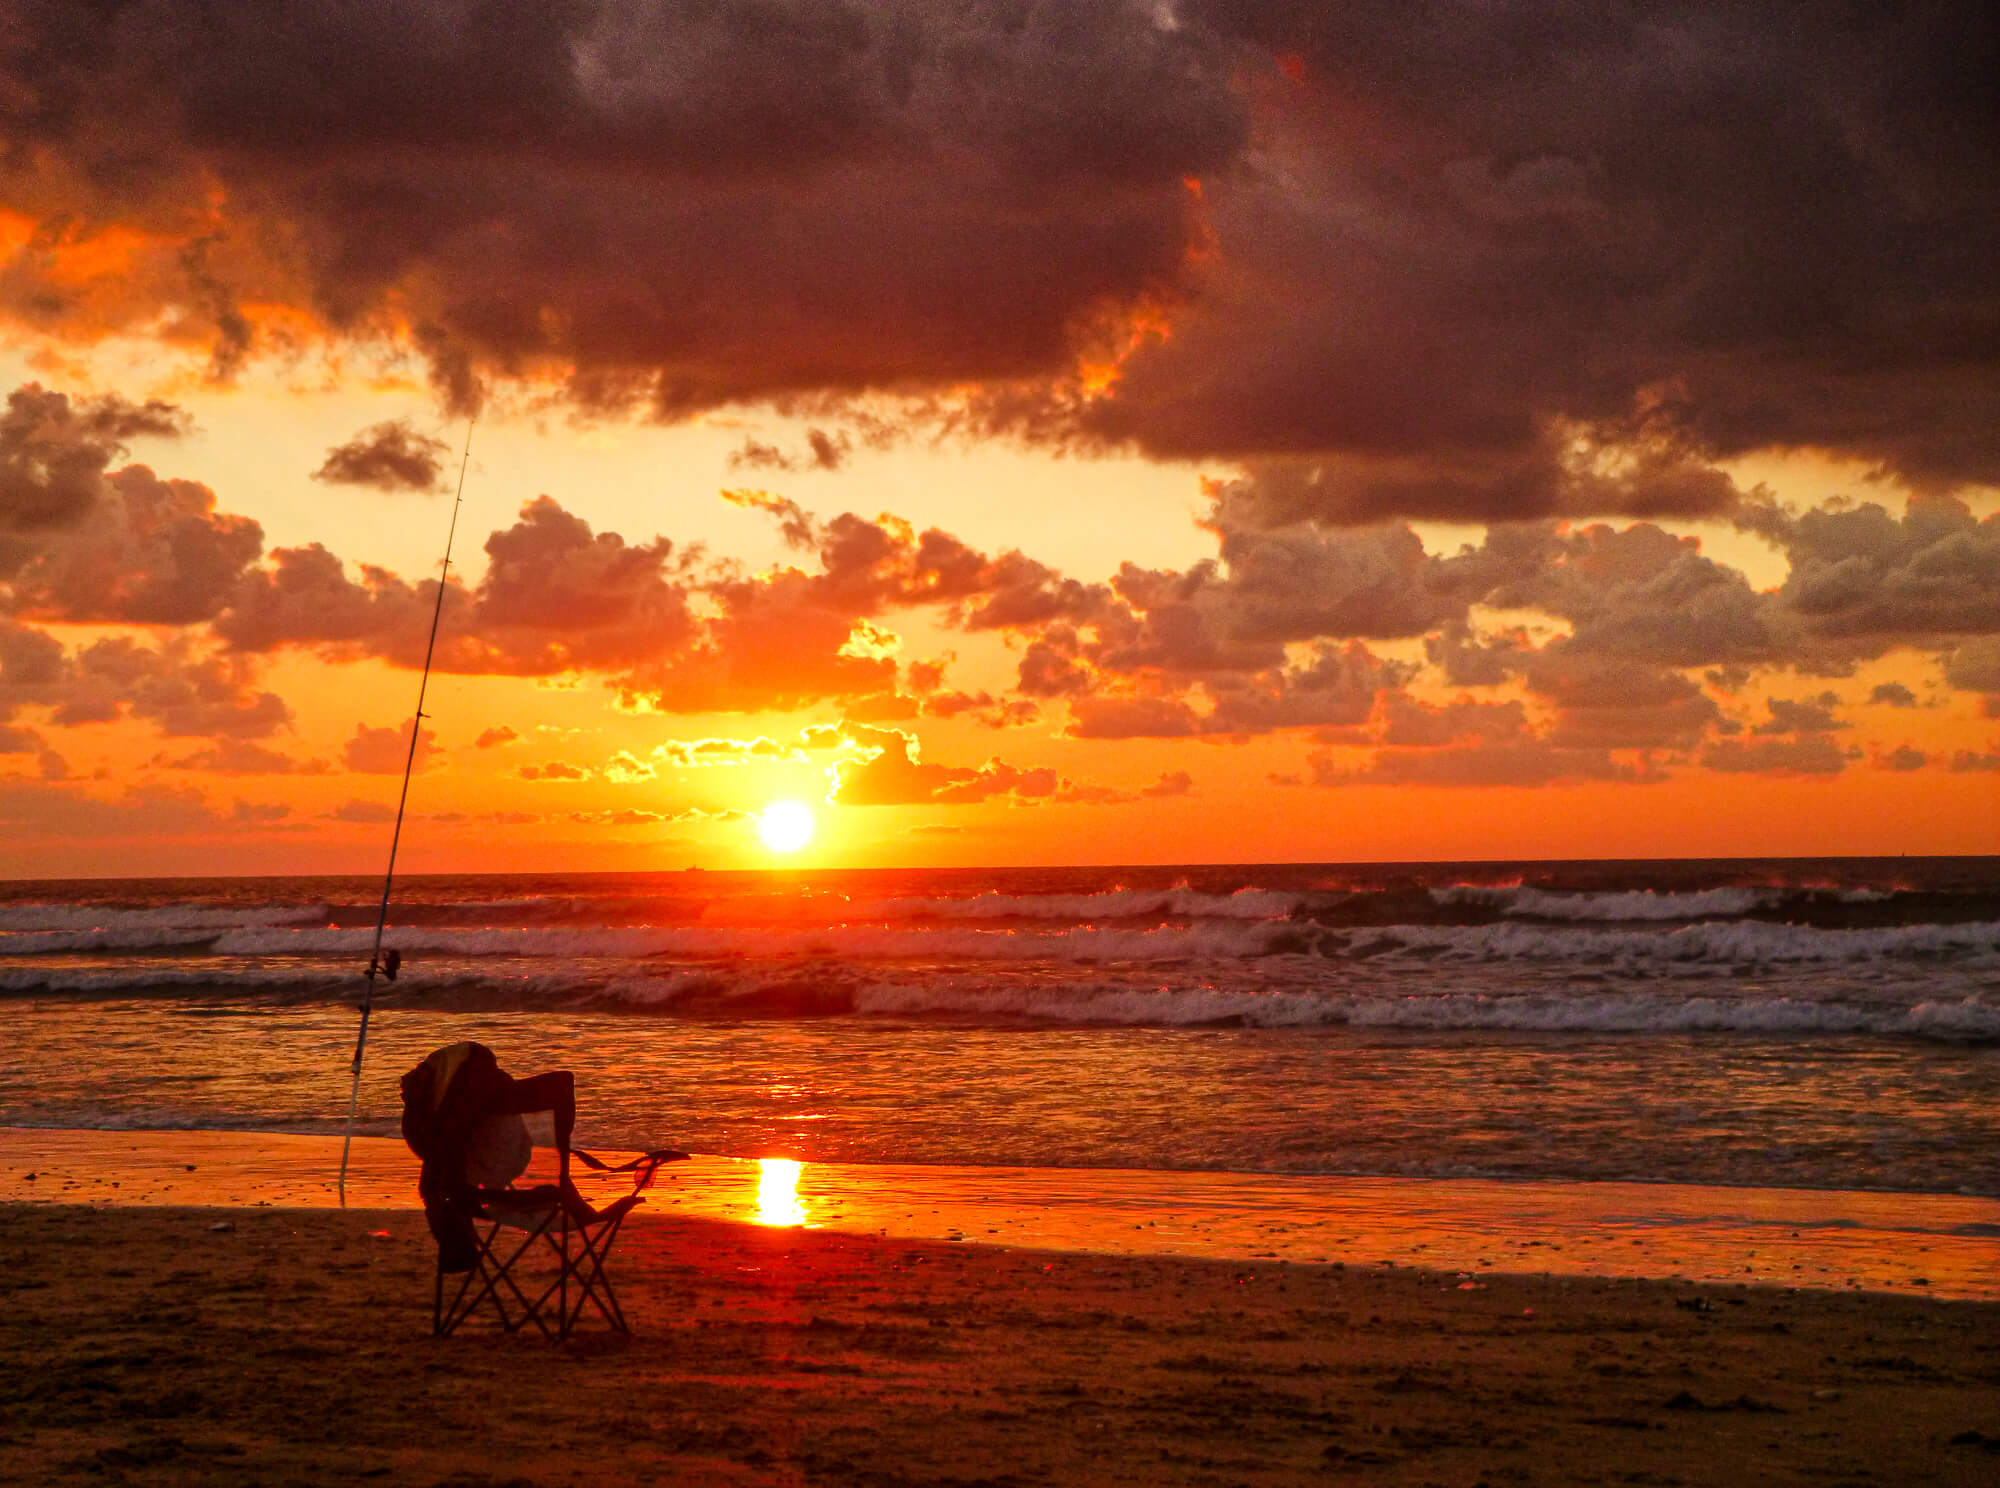 Sunset fishing at one of Israel's beautiful beach places